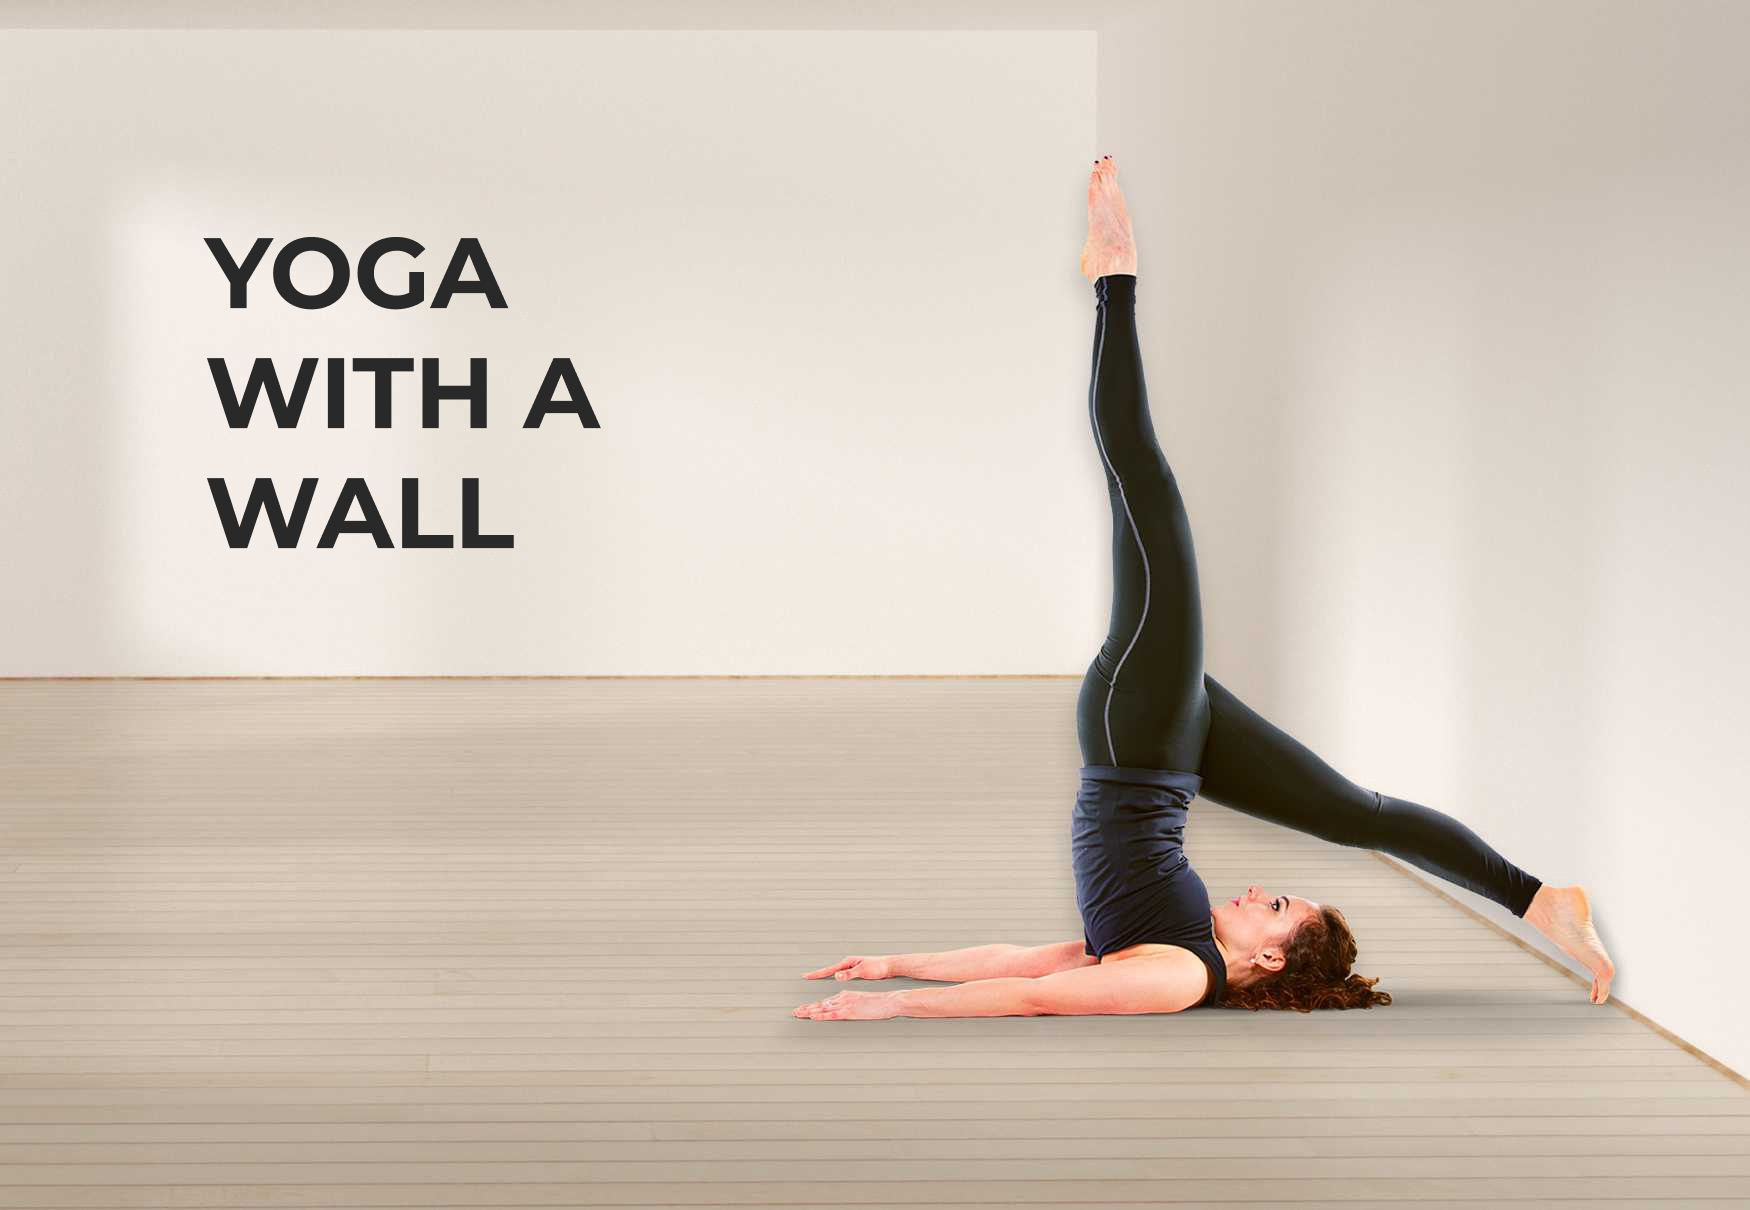 YOGA WITH A WALL